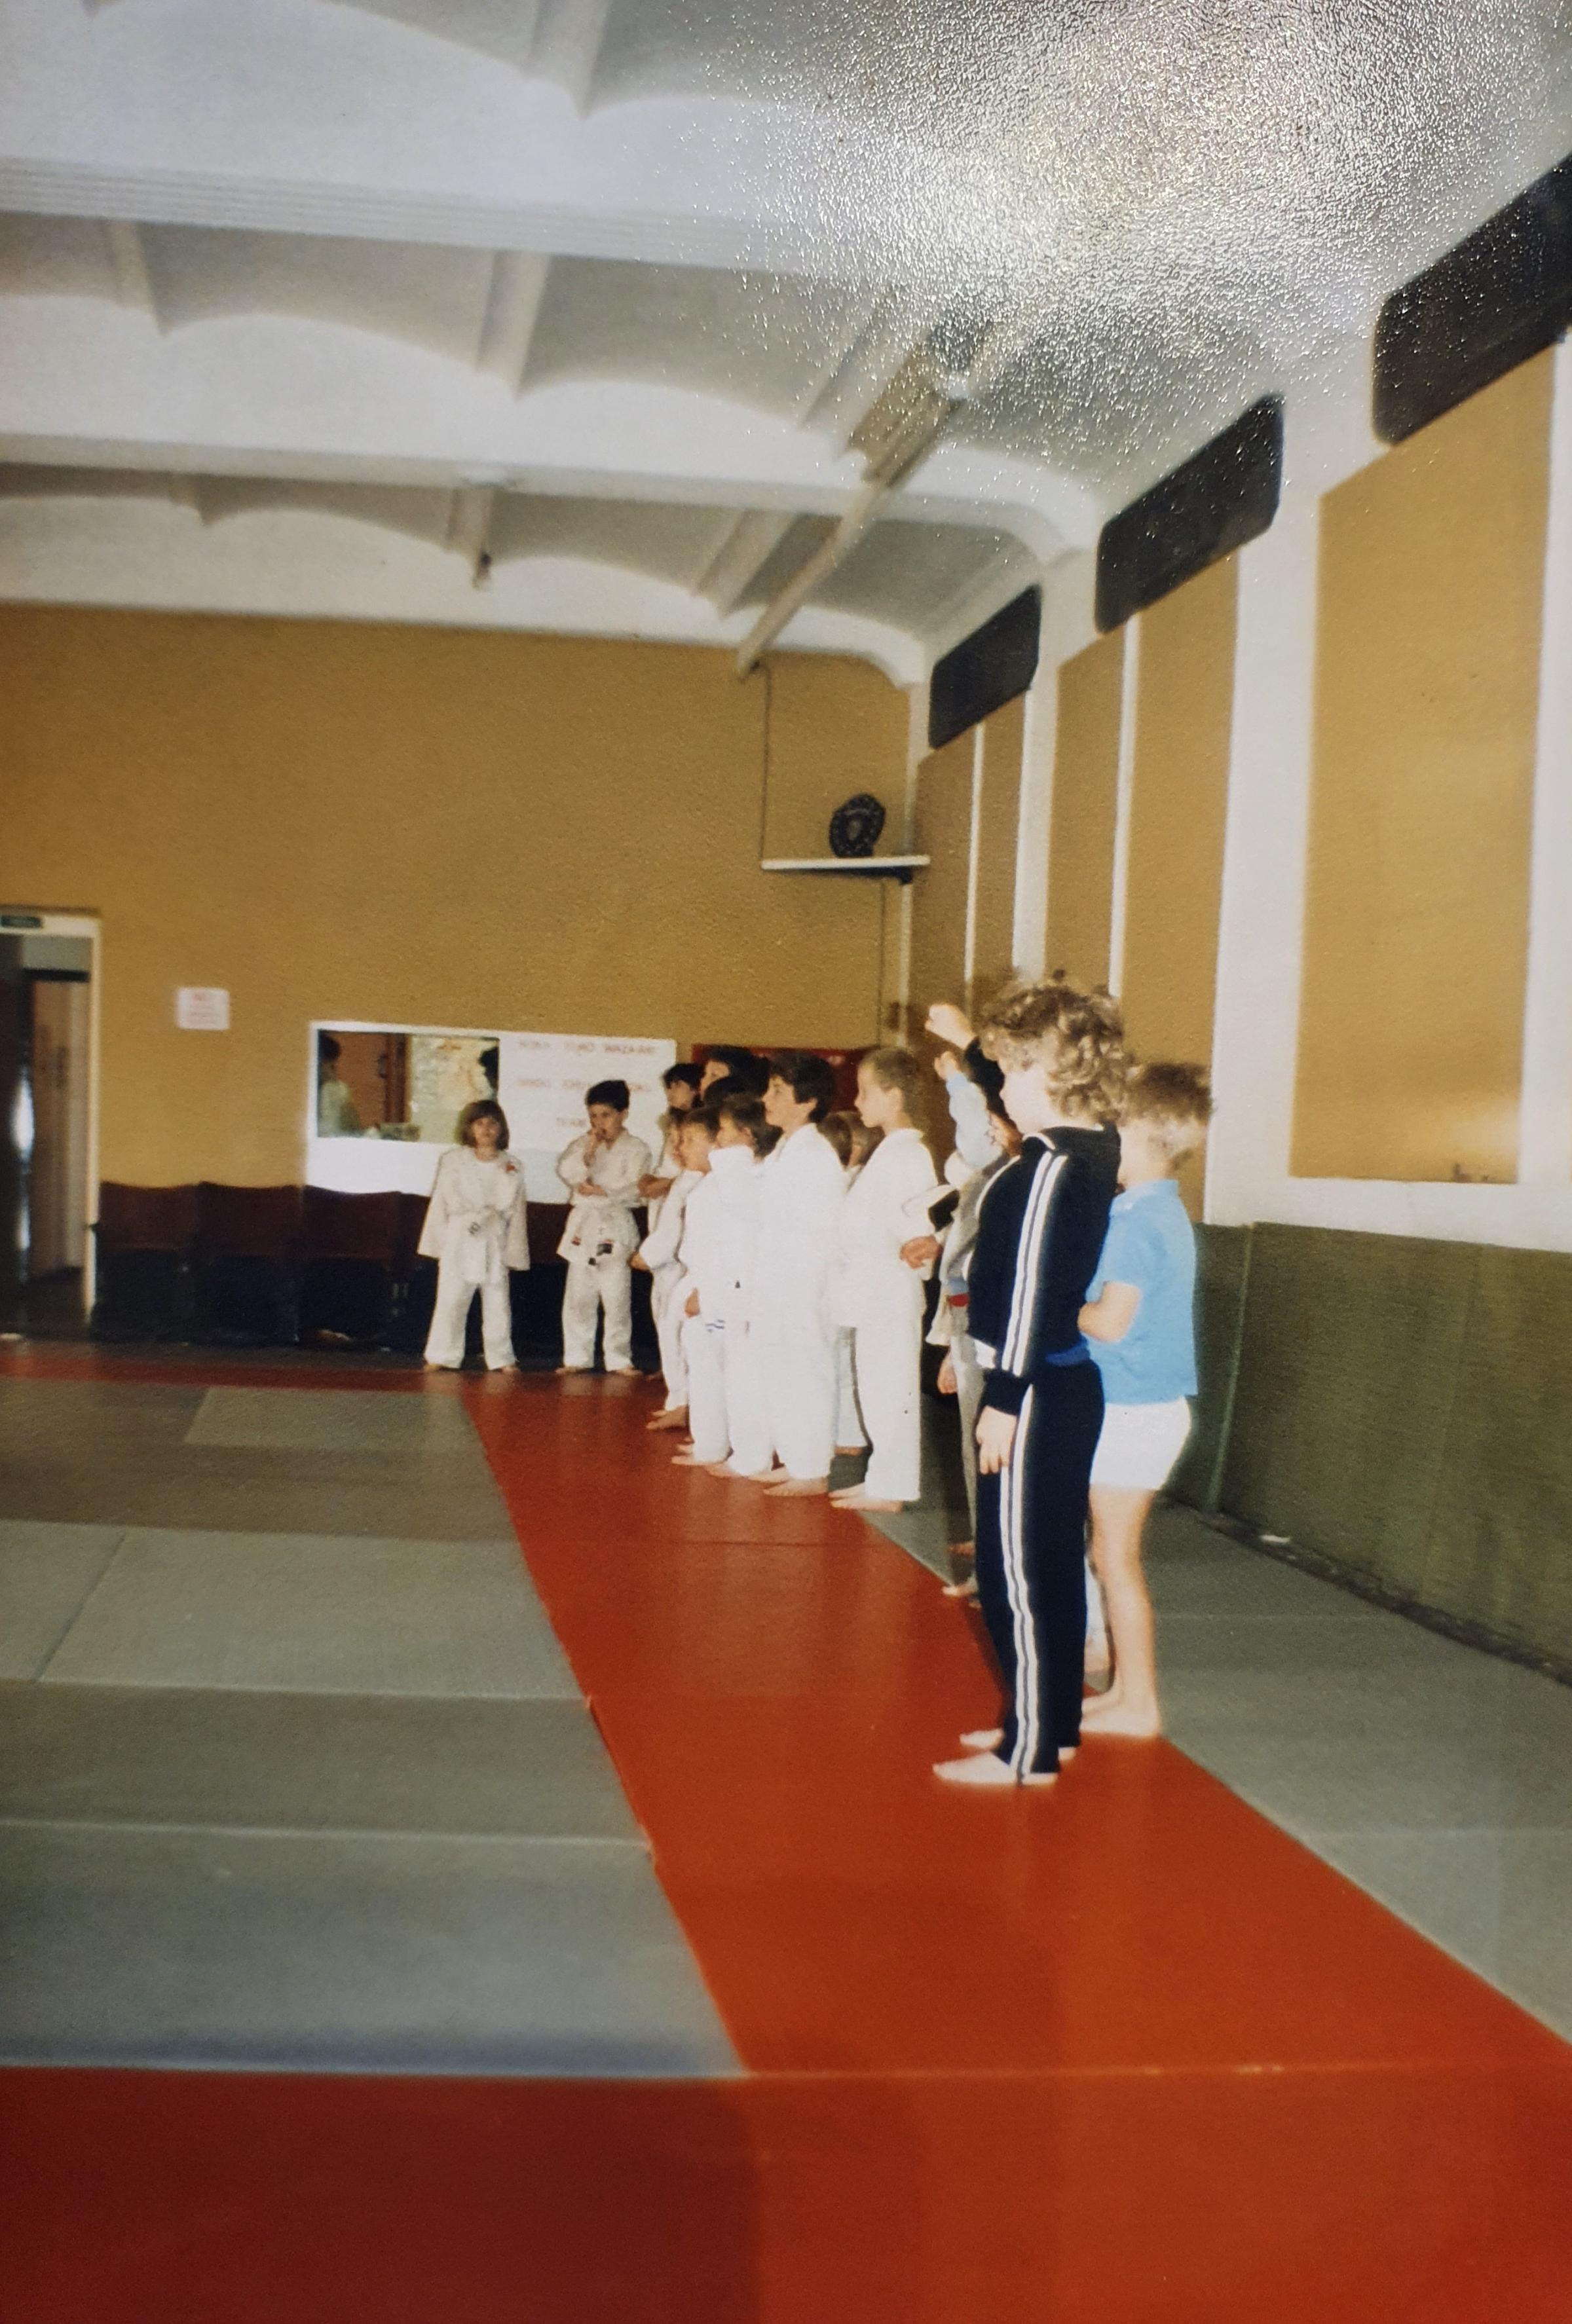 Worcester ’83 Judo Club in 1985, based in the former Gaumont Theatre. The small girl standing at the far end facing the camera, is the author of this article!